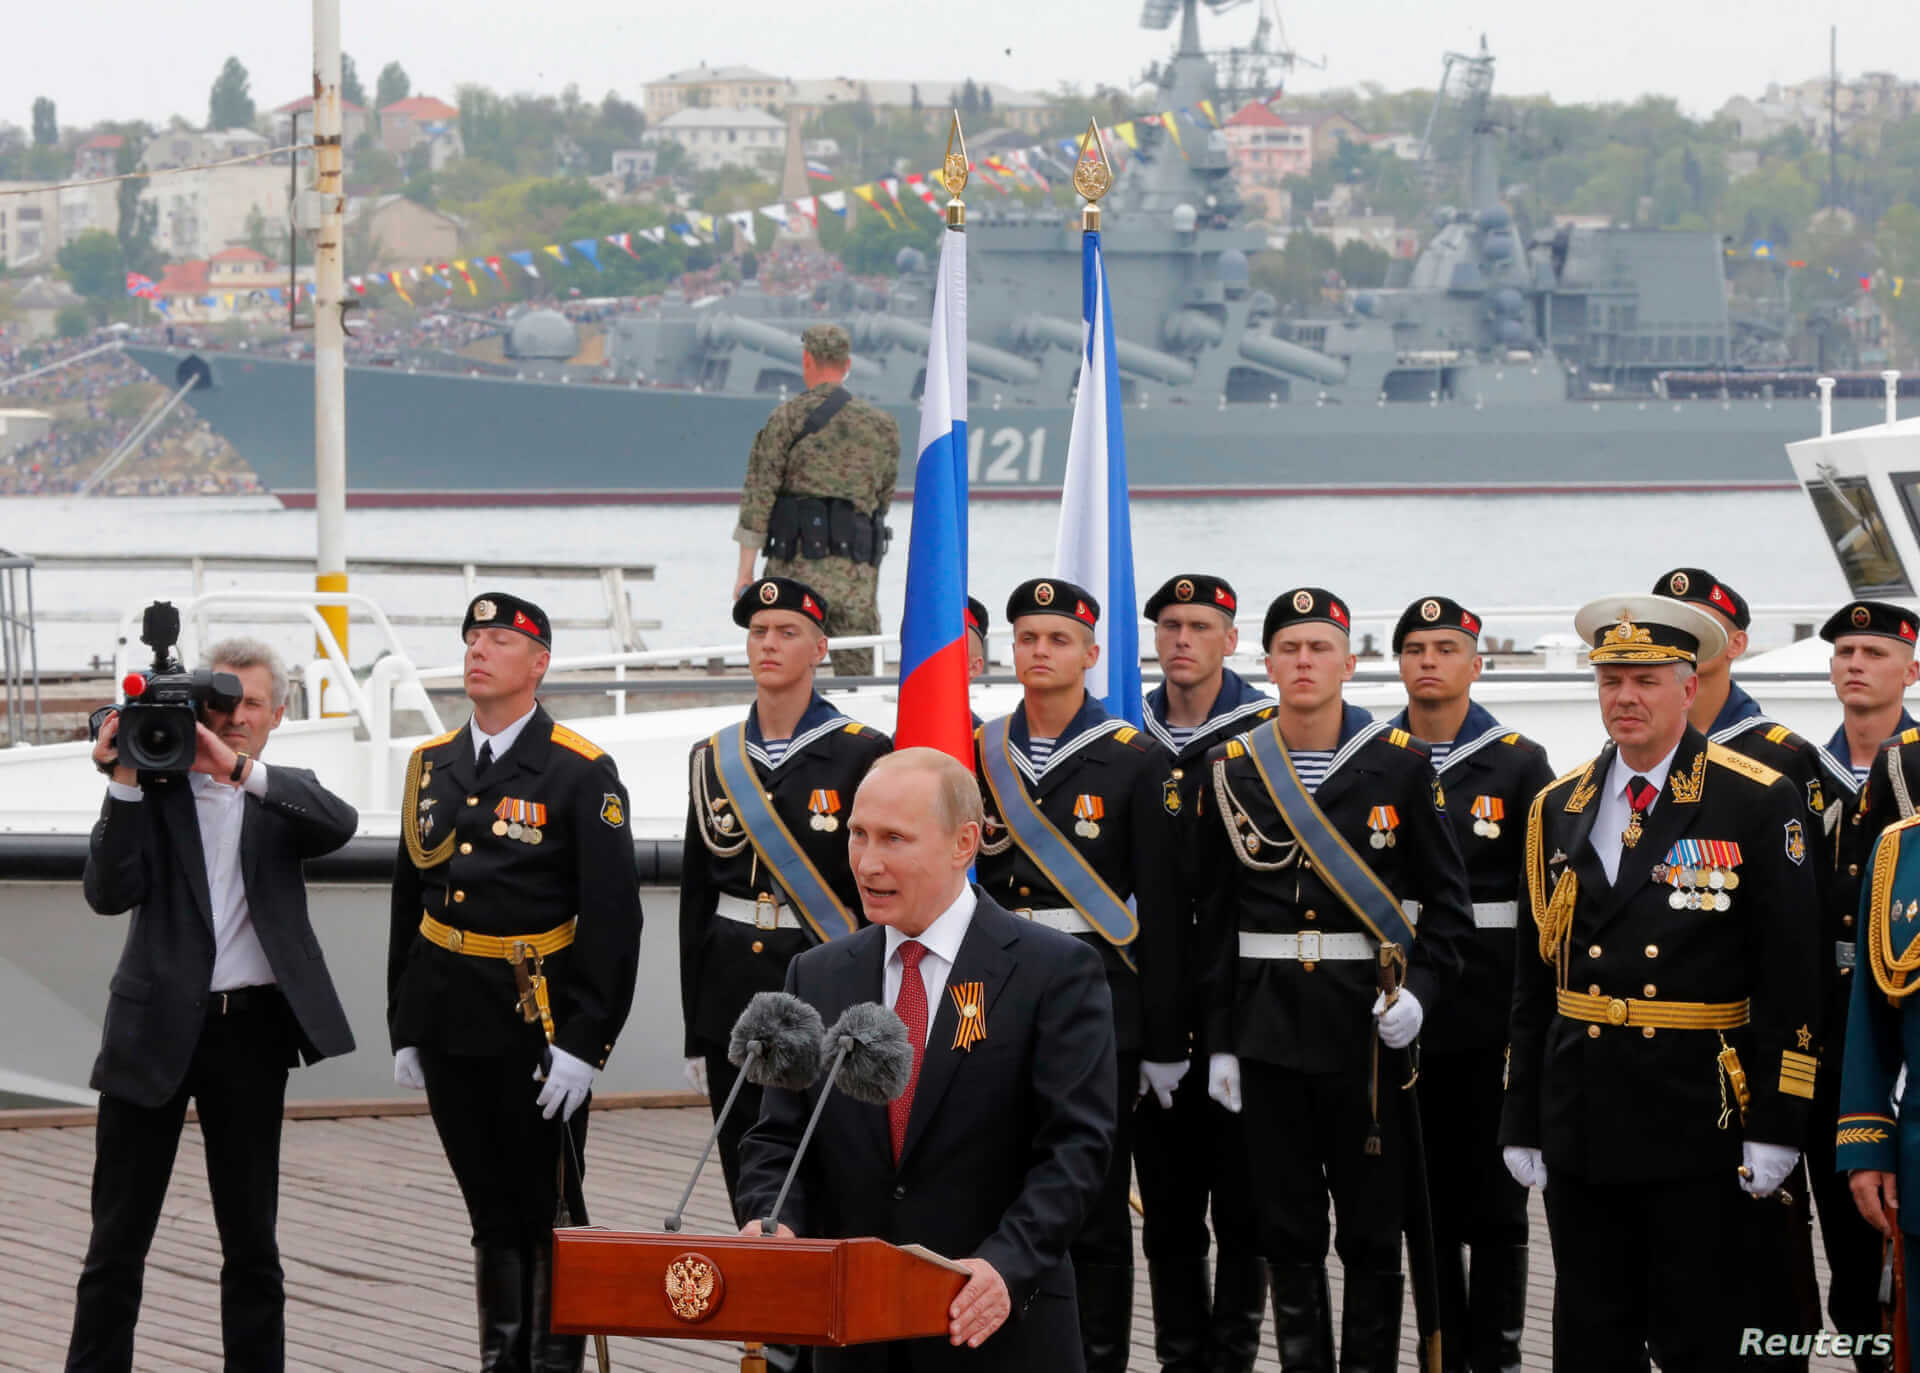 Putin Attends Russian Warship Keel-Laying Ceremony in Annexed Crimea